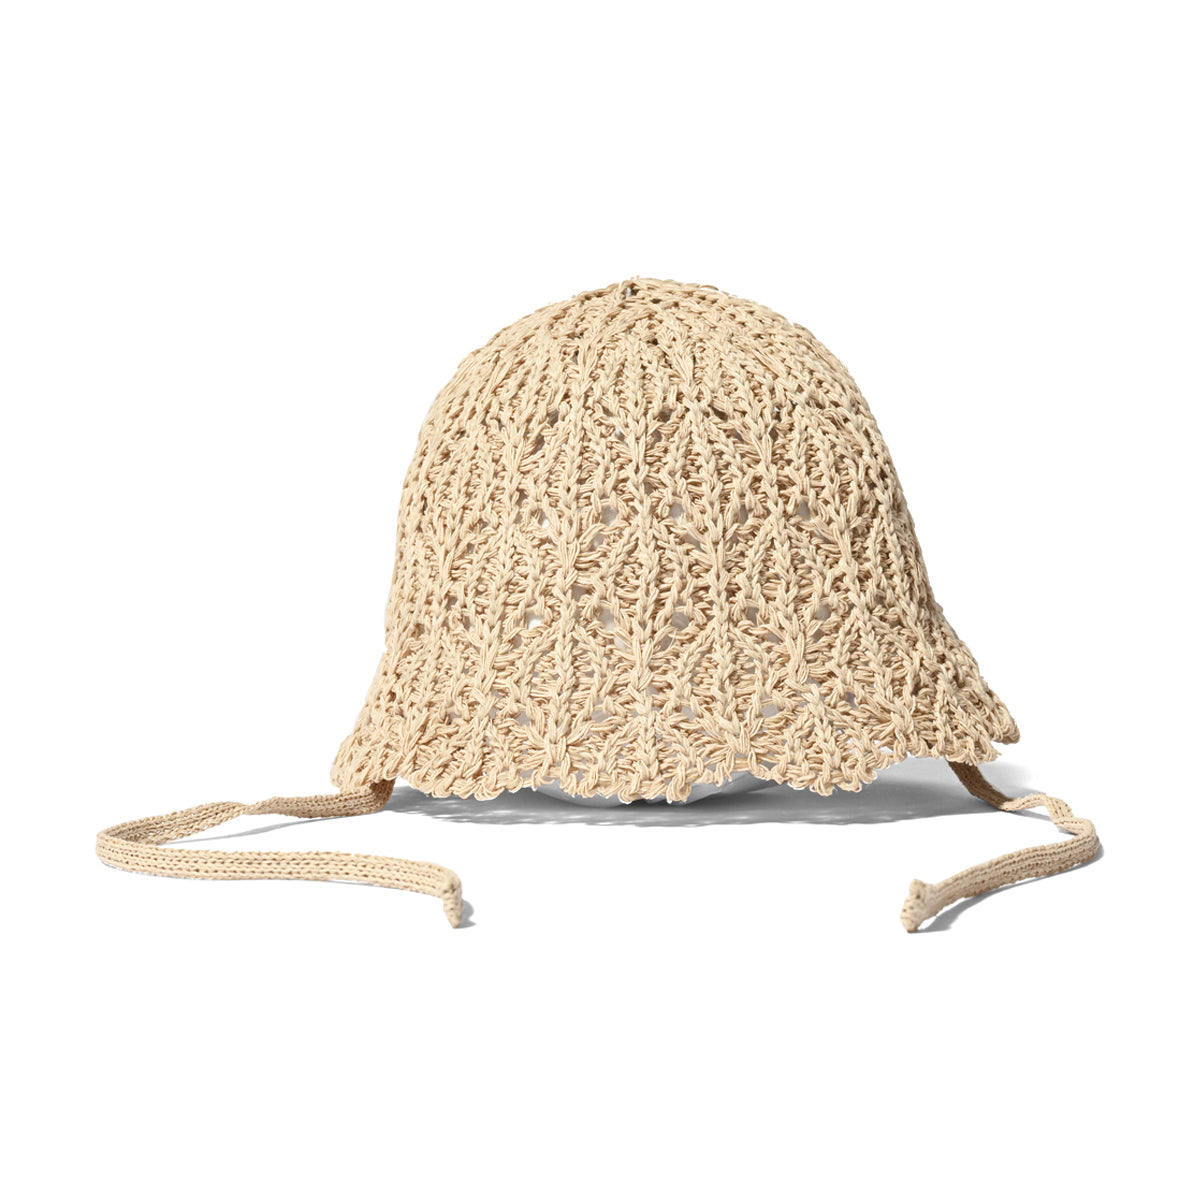 HOMEGAME - KNITTED LACE HAT【HG241411】